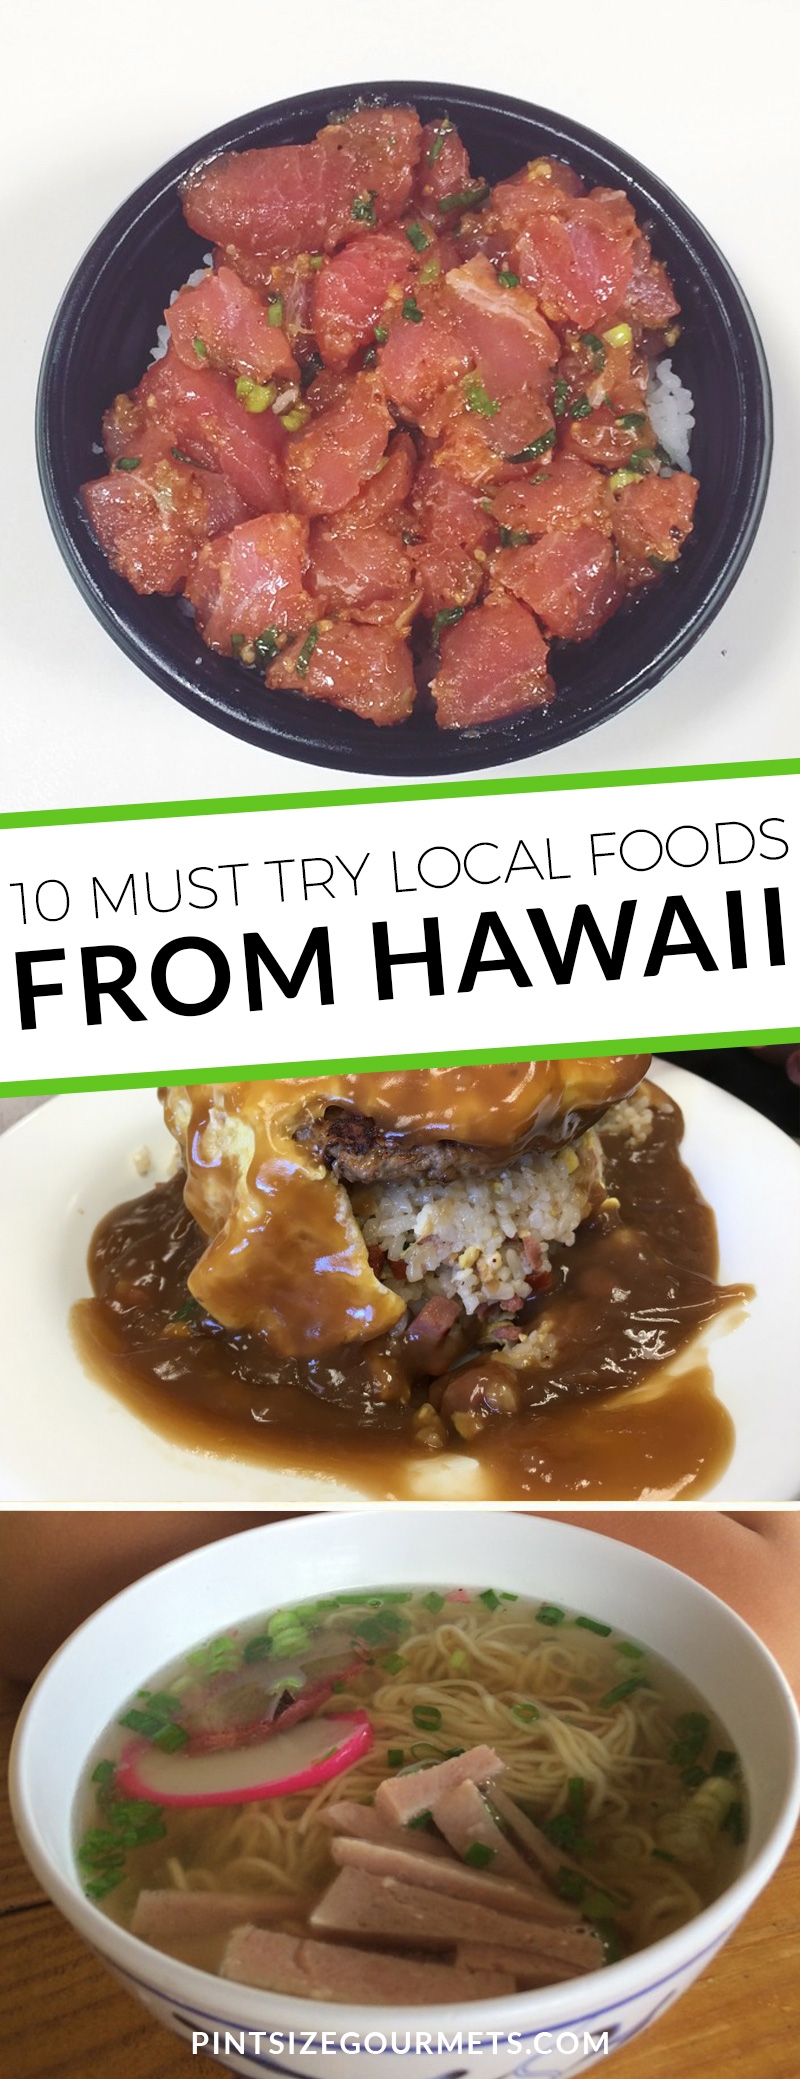 local foods from Hawaii 